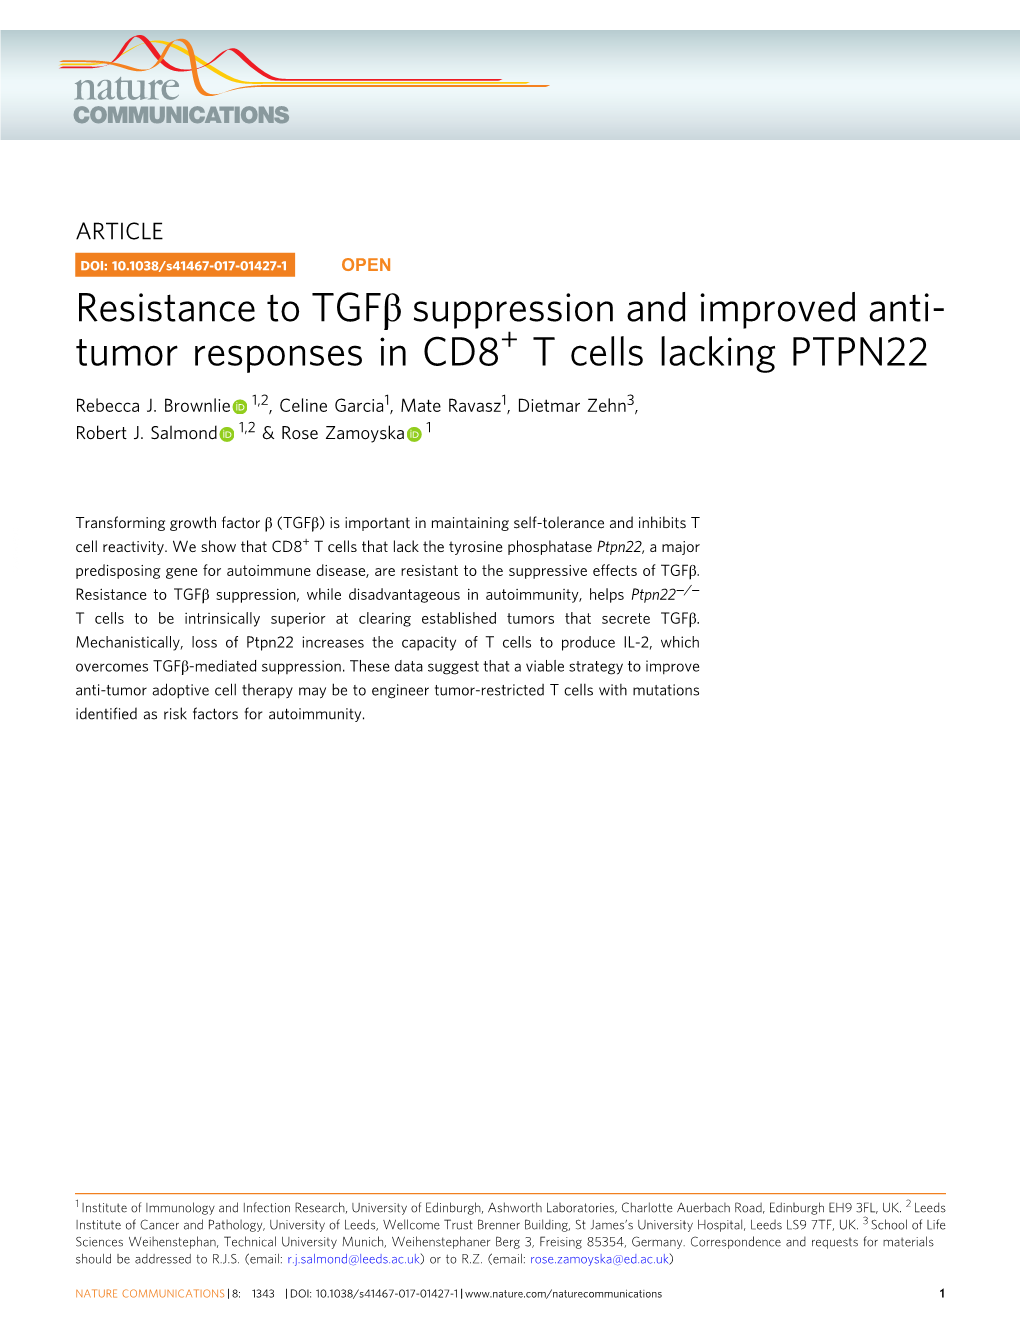 Resistance to Tgfβ Suppression and Improved Anti-Tumor Responses In